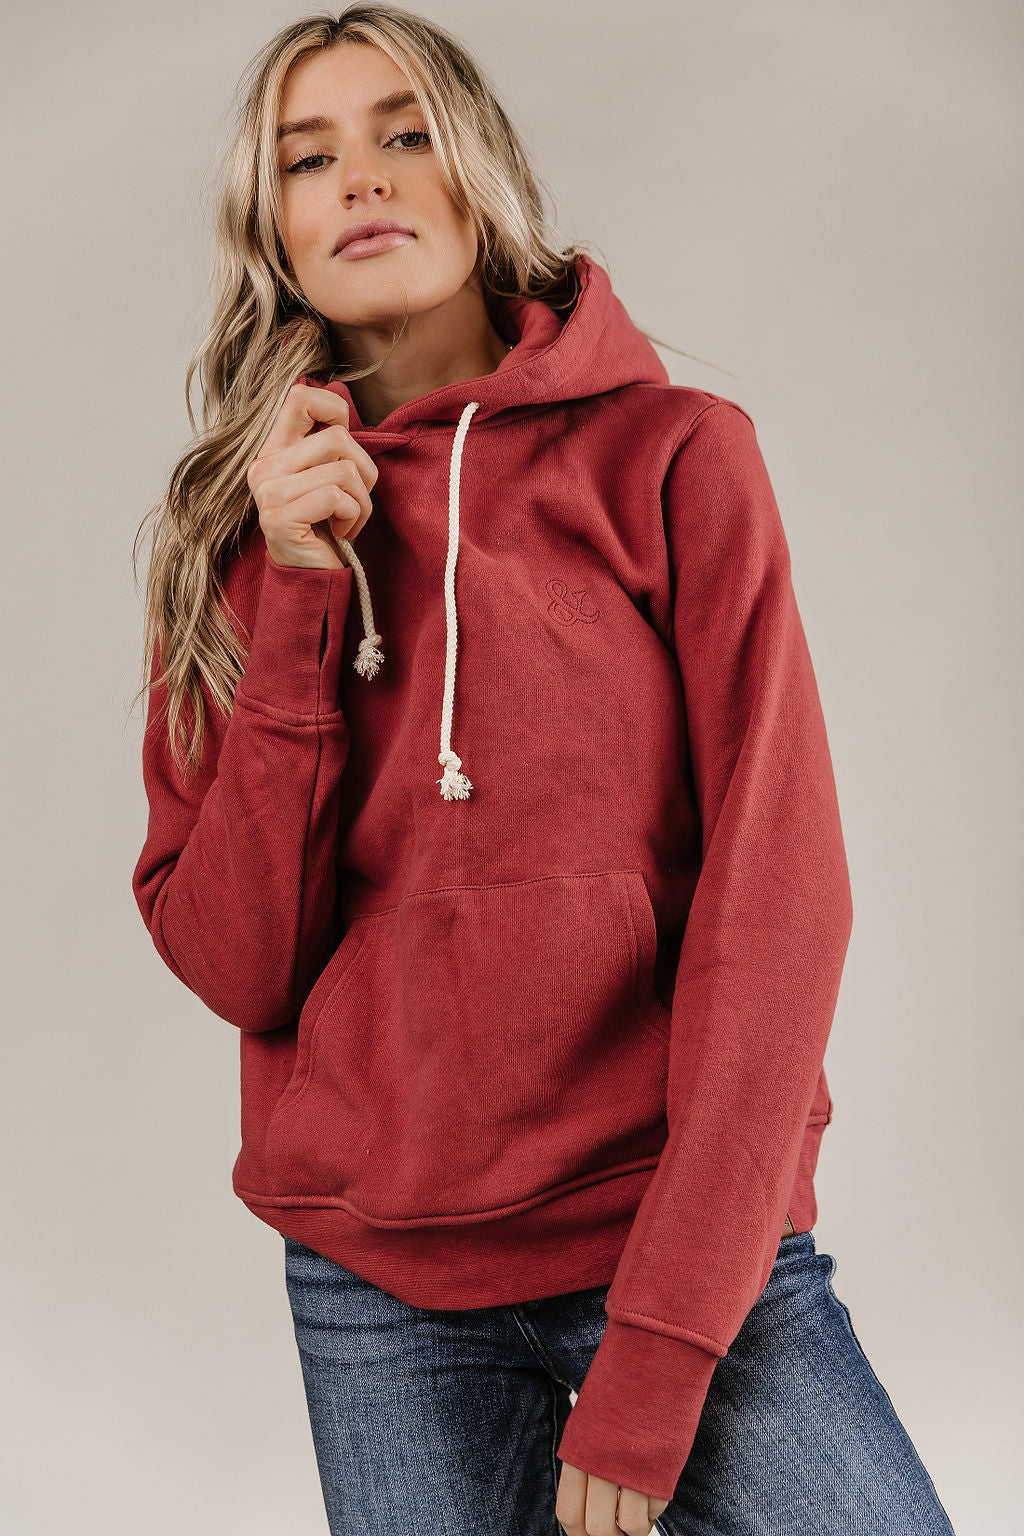 ONLINE ONLY! Staple Hoodie- Strawberry